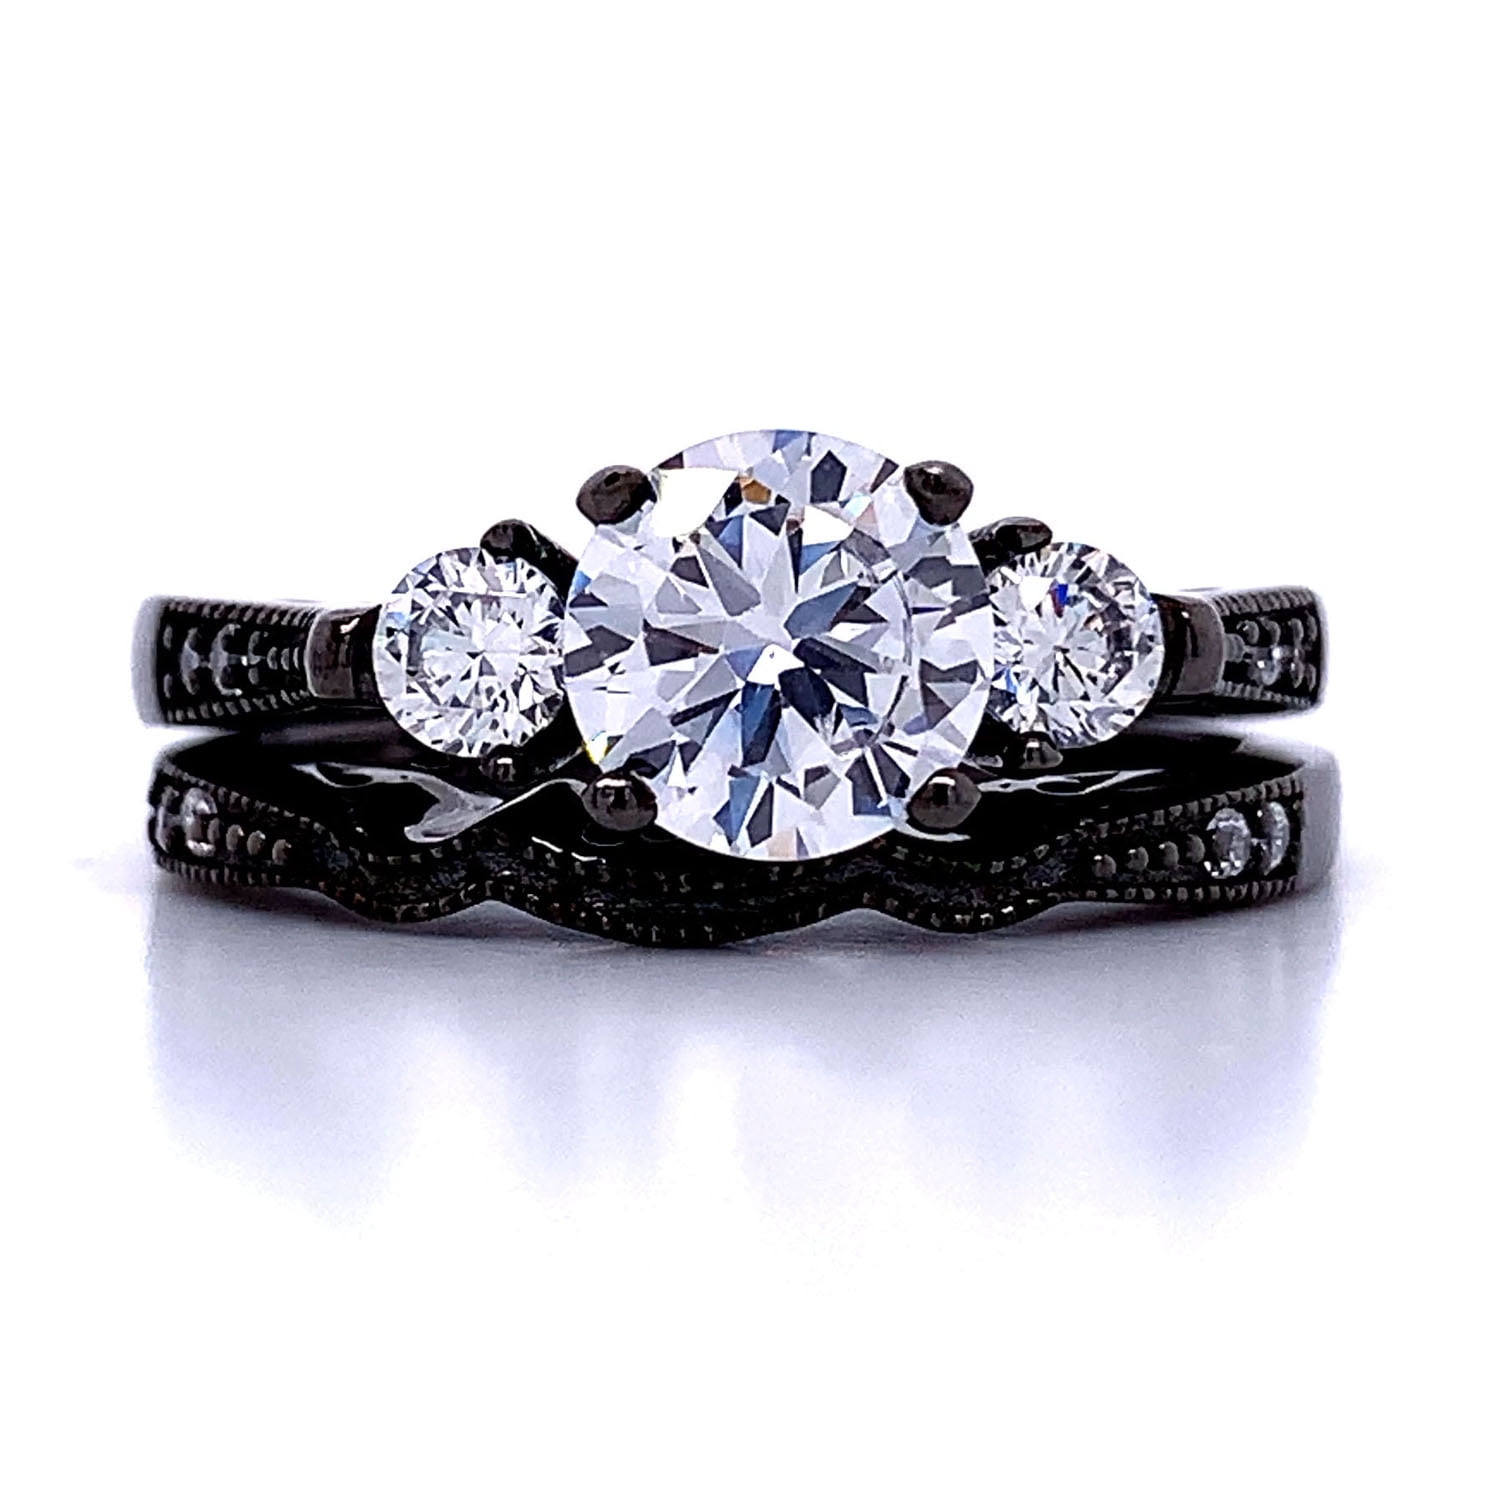 Women's Black Three Stone Solid Sterling Silver Nicely Wedding Ring Band Set 